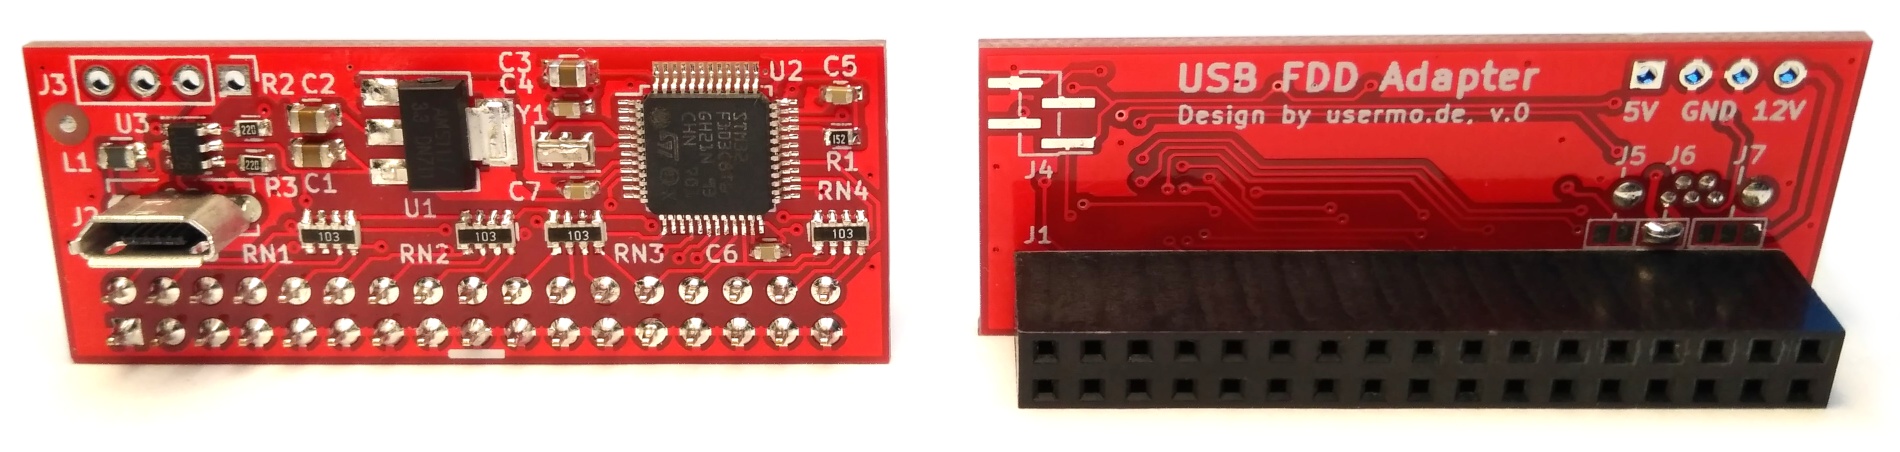 USB FDD Adapter front and back